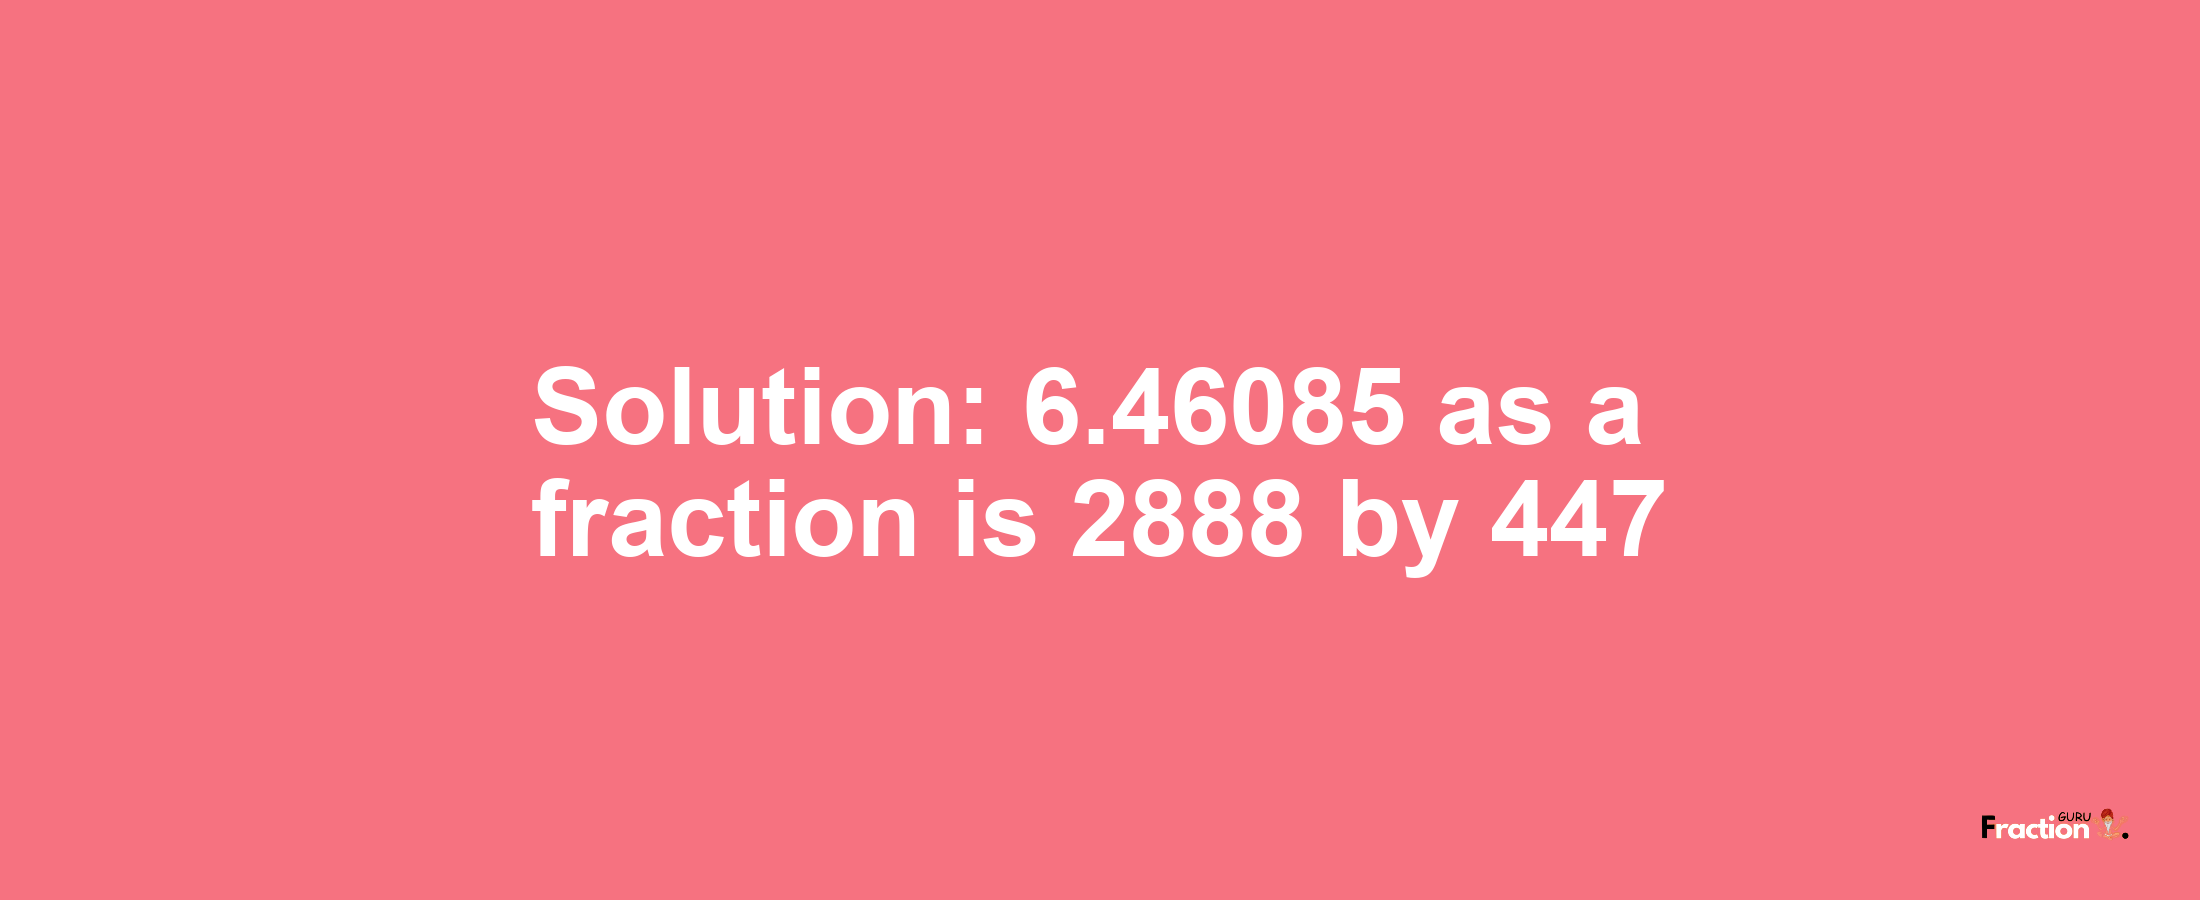 Solution:6.46085 as a fraction is 2888/447